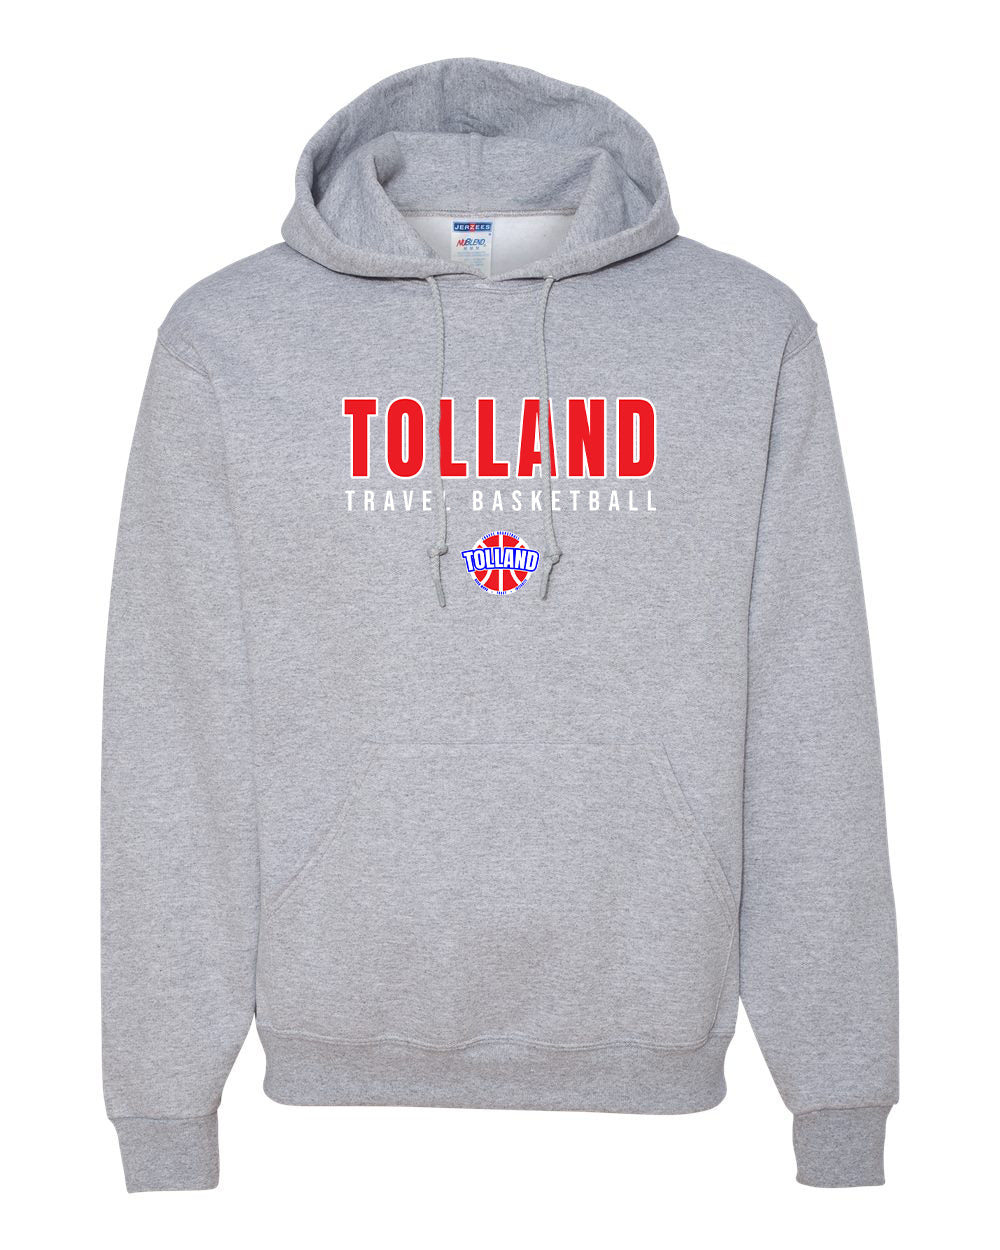 Tolland TB Adult Hoodie "TTB" - 996MR (color options available)